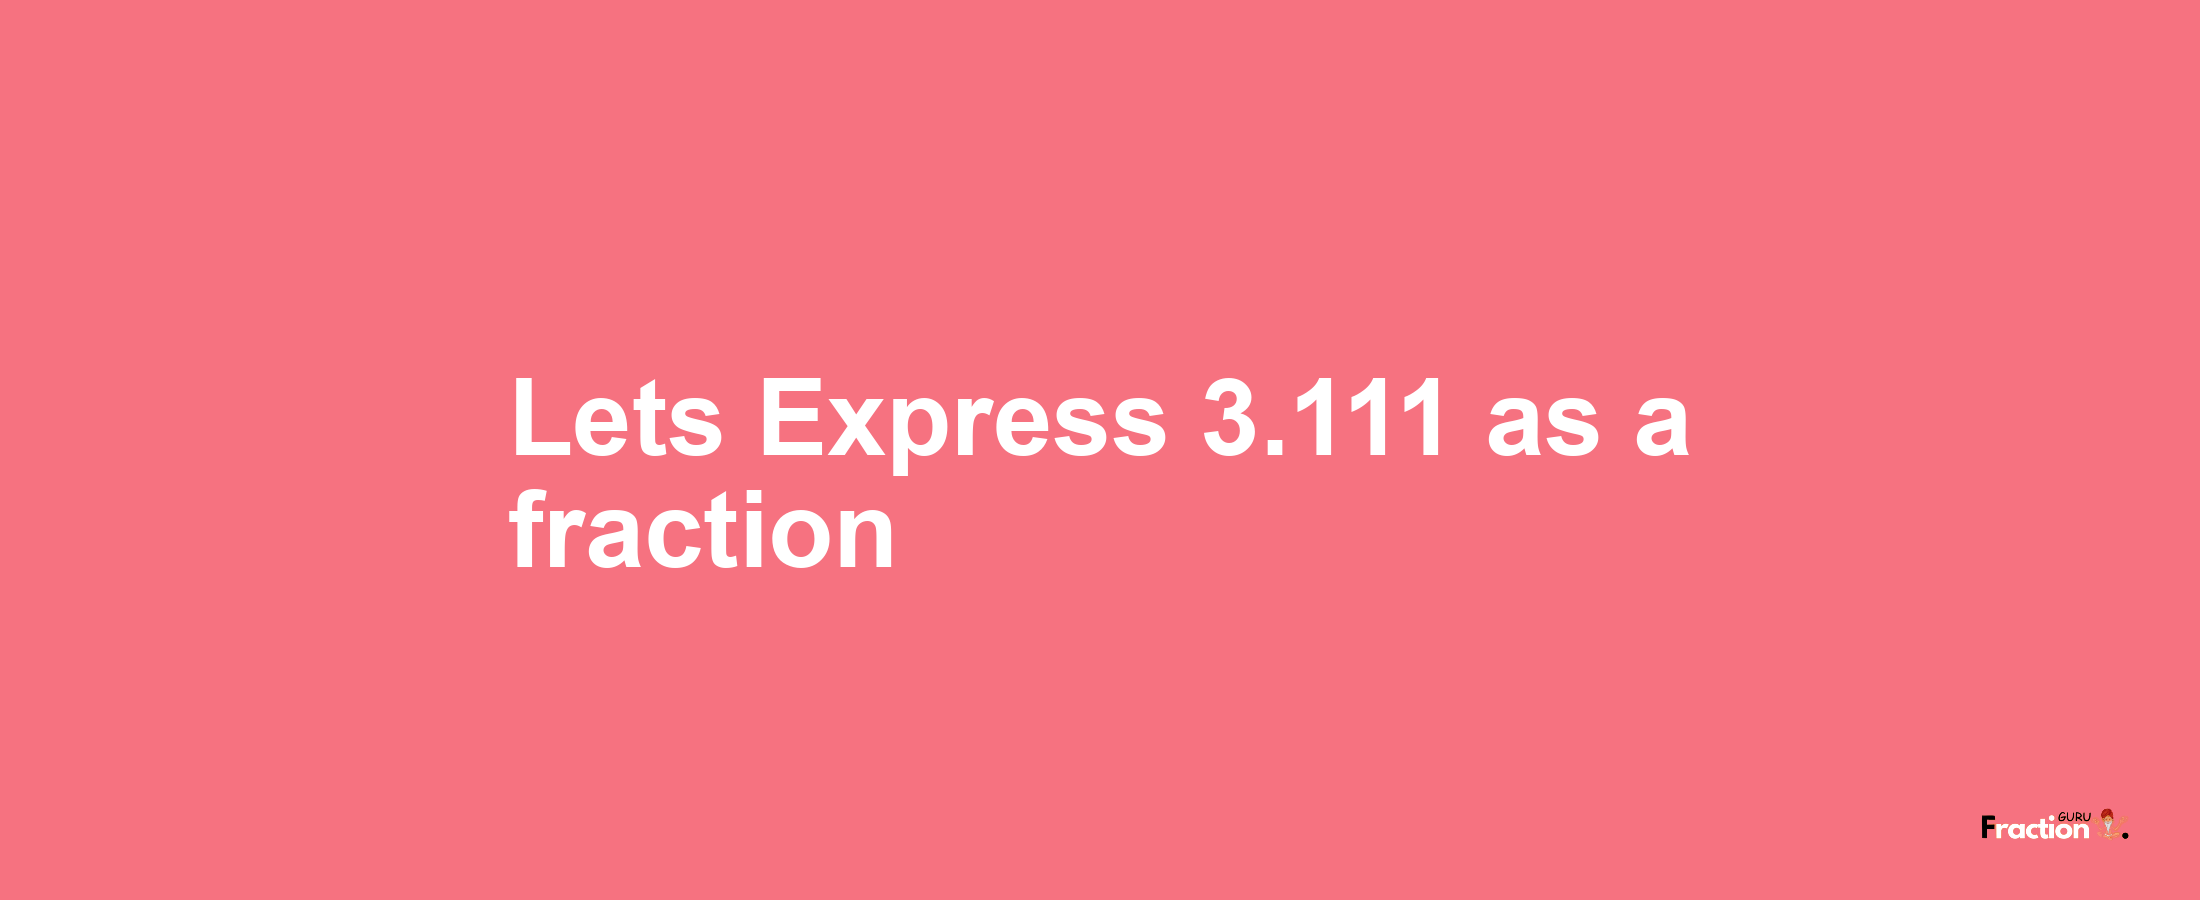 Lets Express 3.111 as afraction